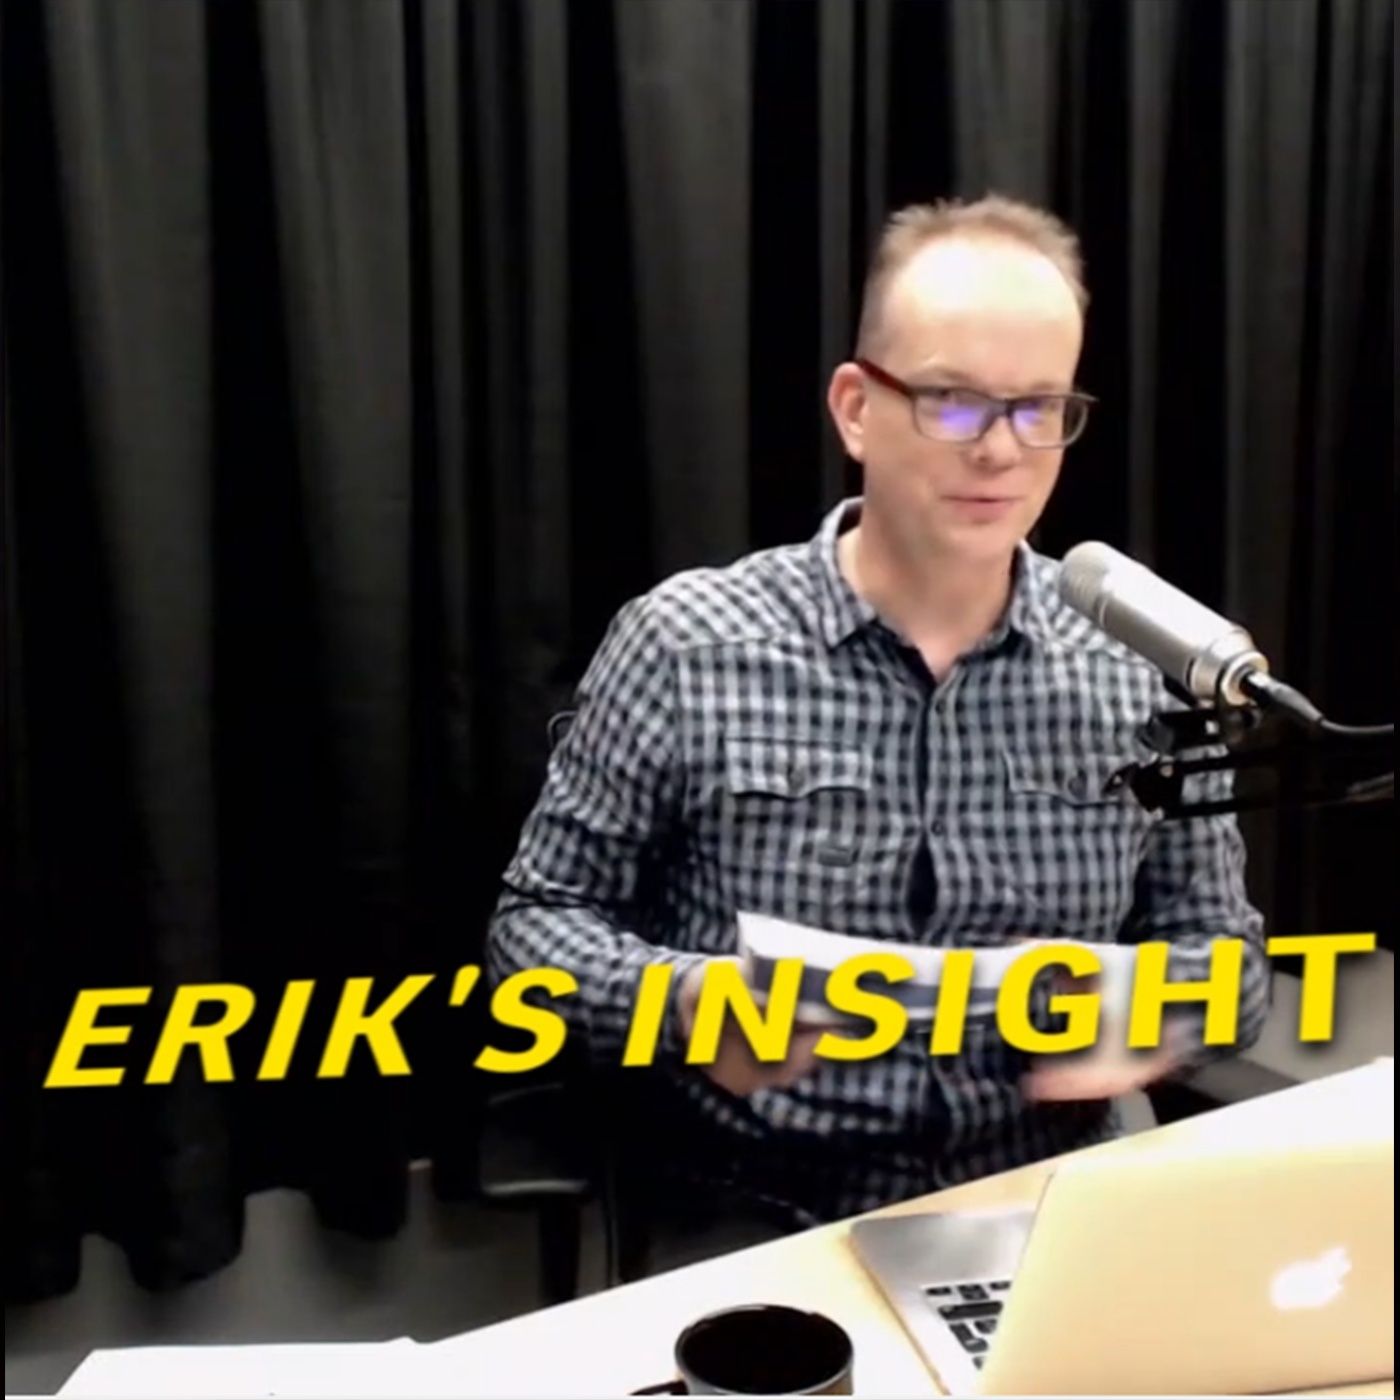 22: Erik's insight - Book The barefoot investor by Scott Pape